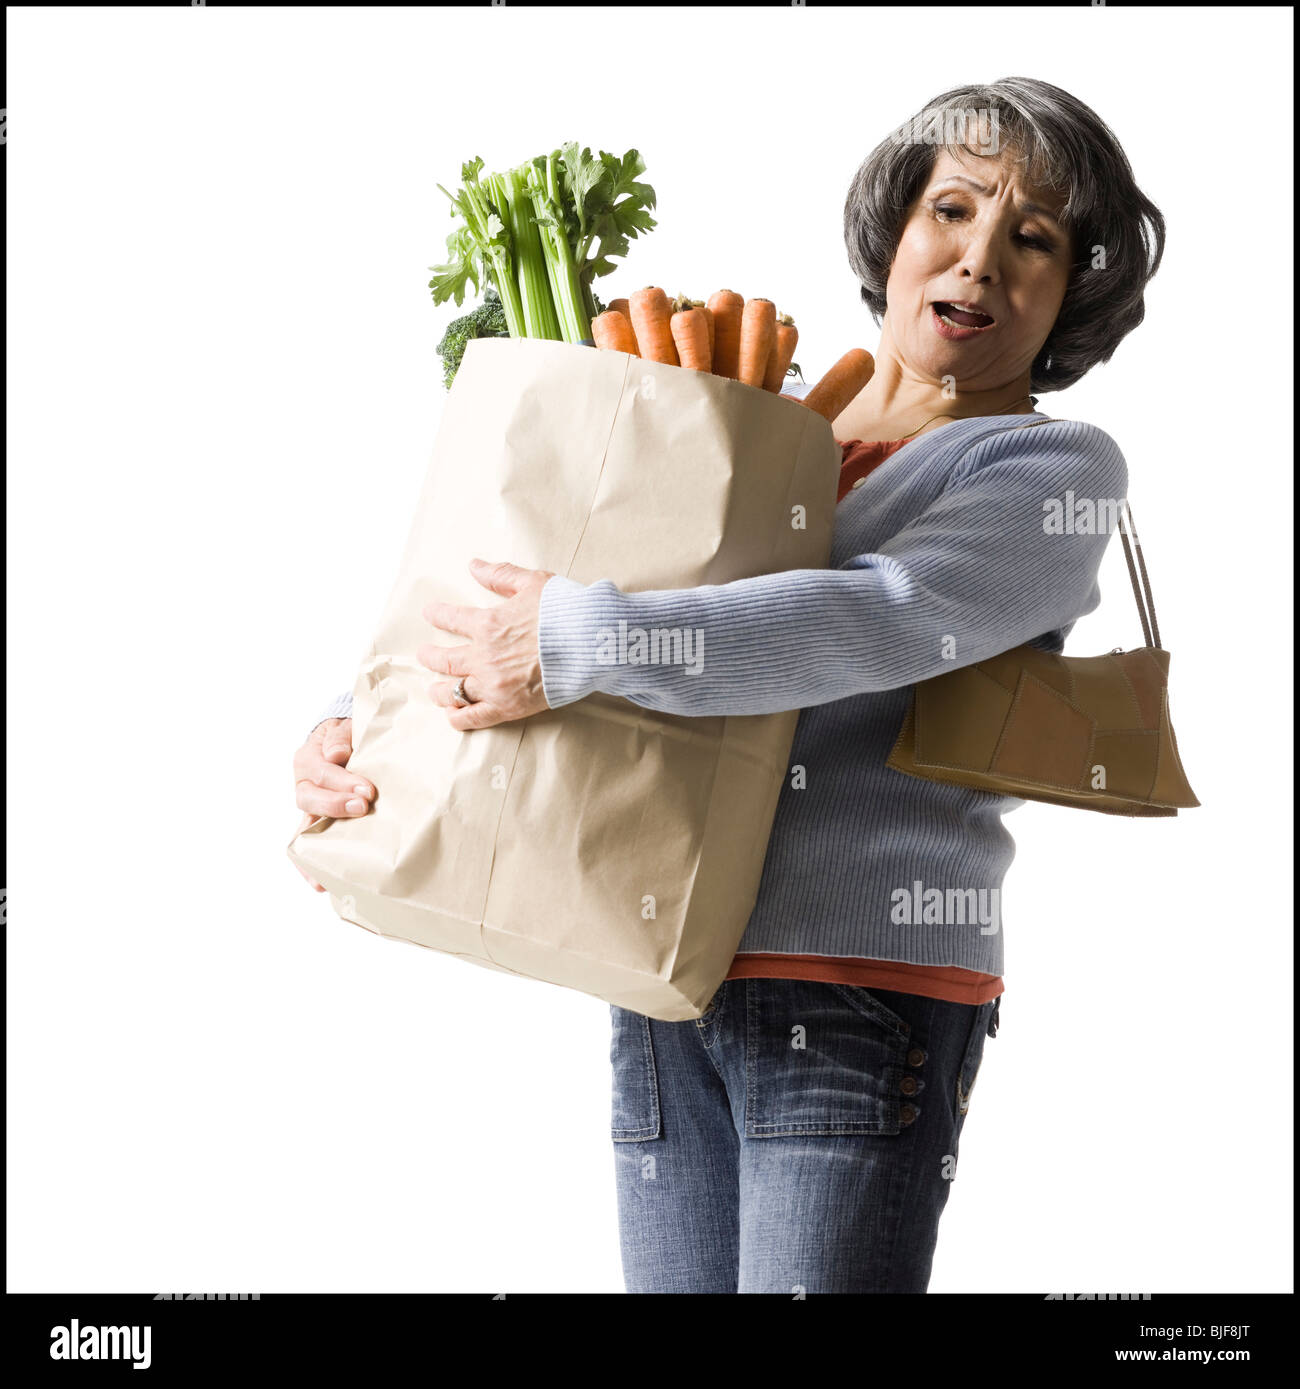 woman holding a bag of groceries Stock Photo